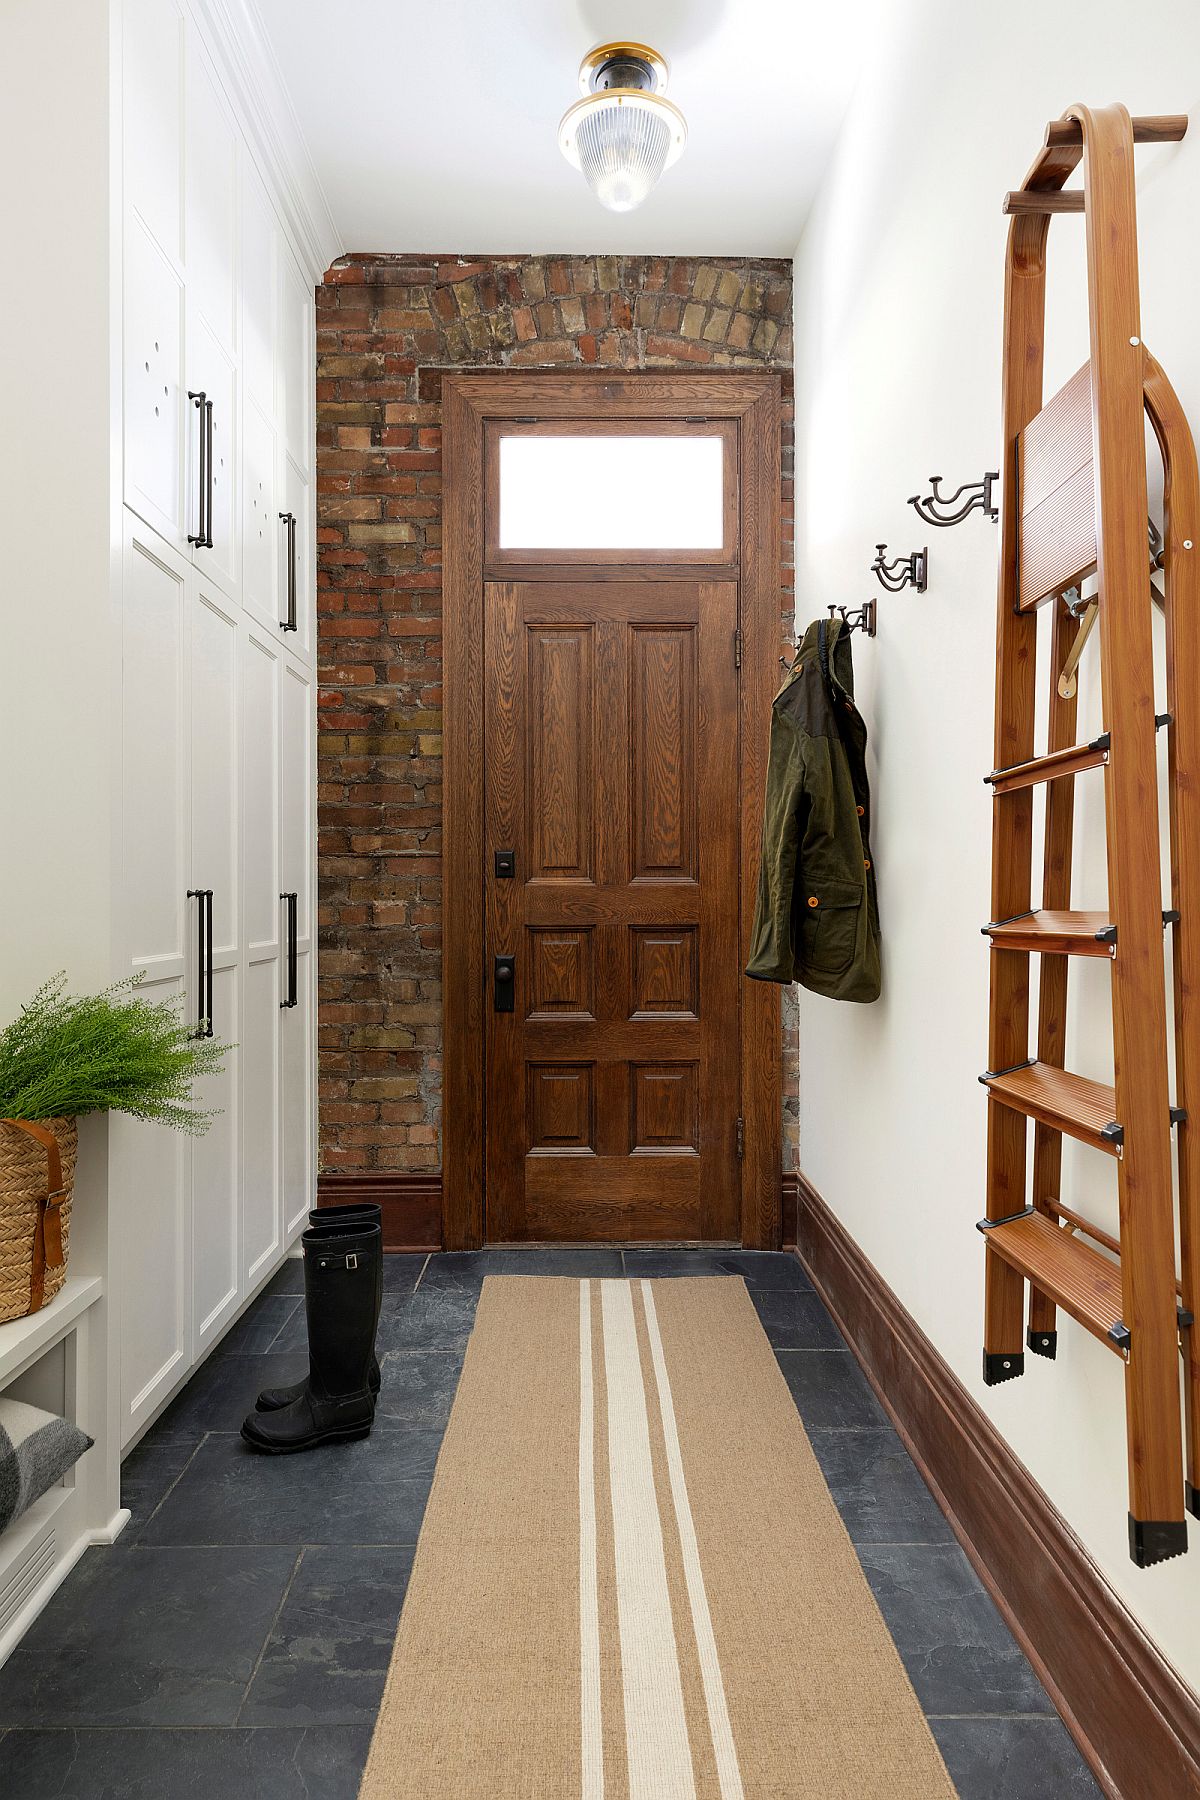 Exposed-wall-next-to-the-main-door-brings-that-something-different-to-the-small-entryway-49655